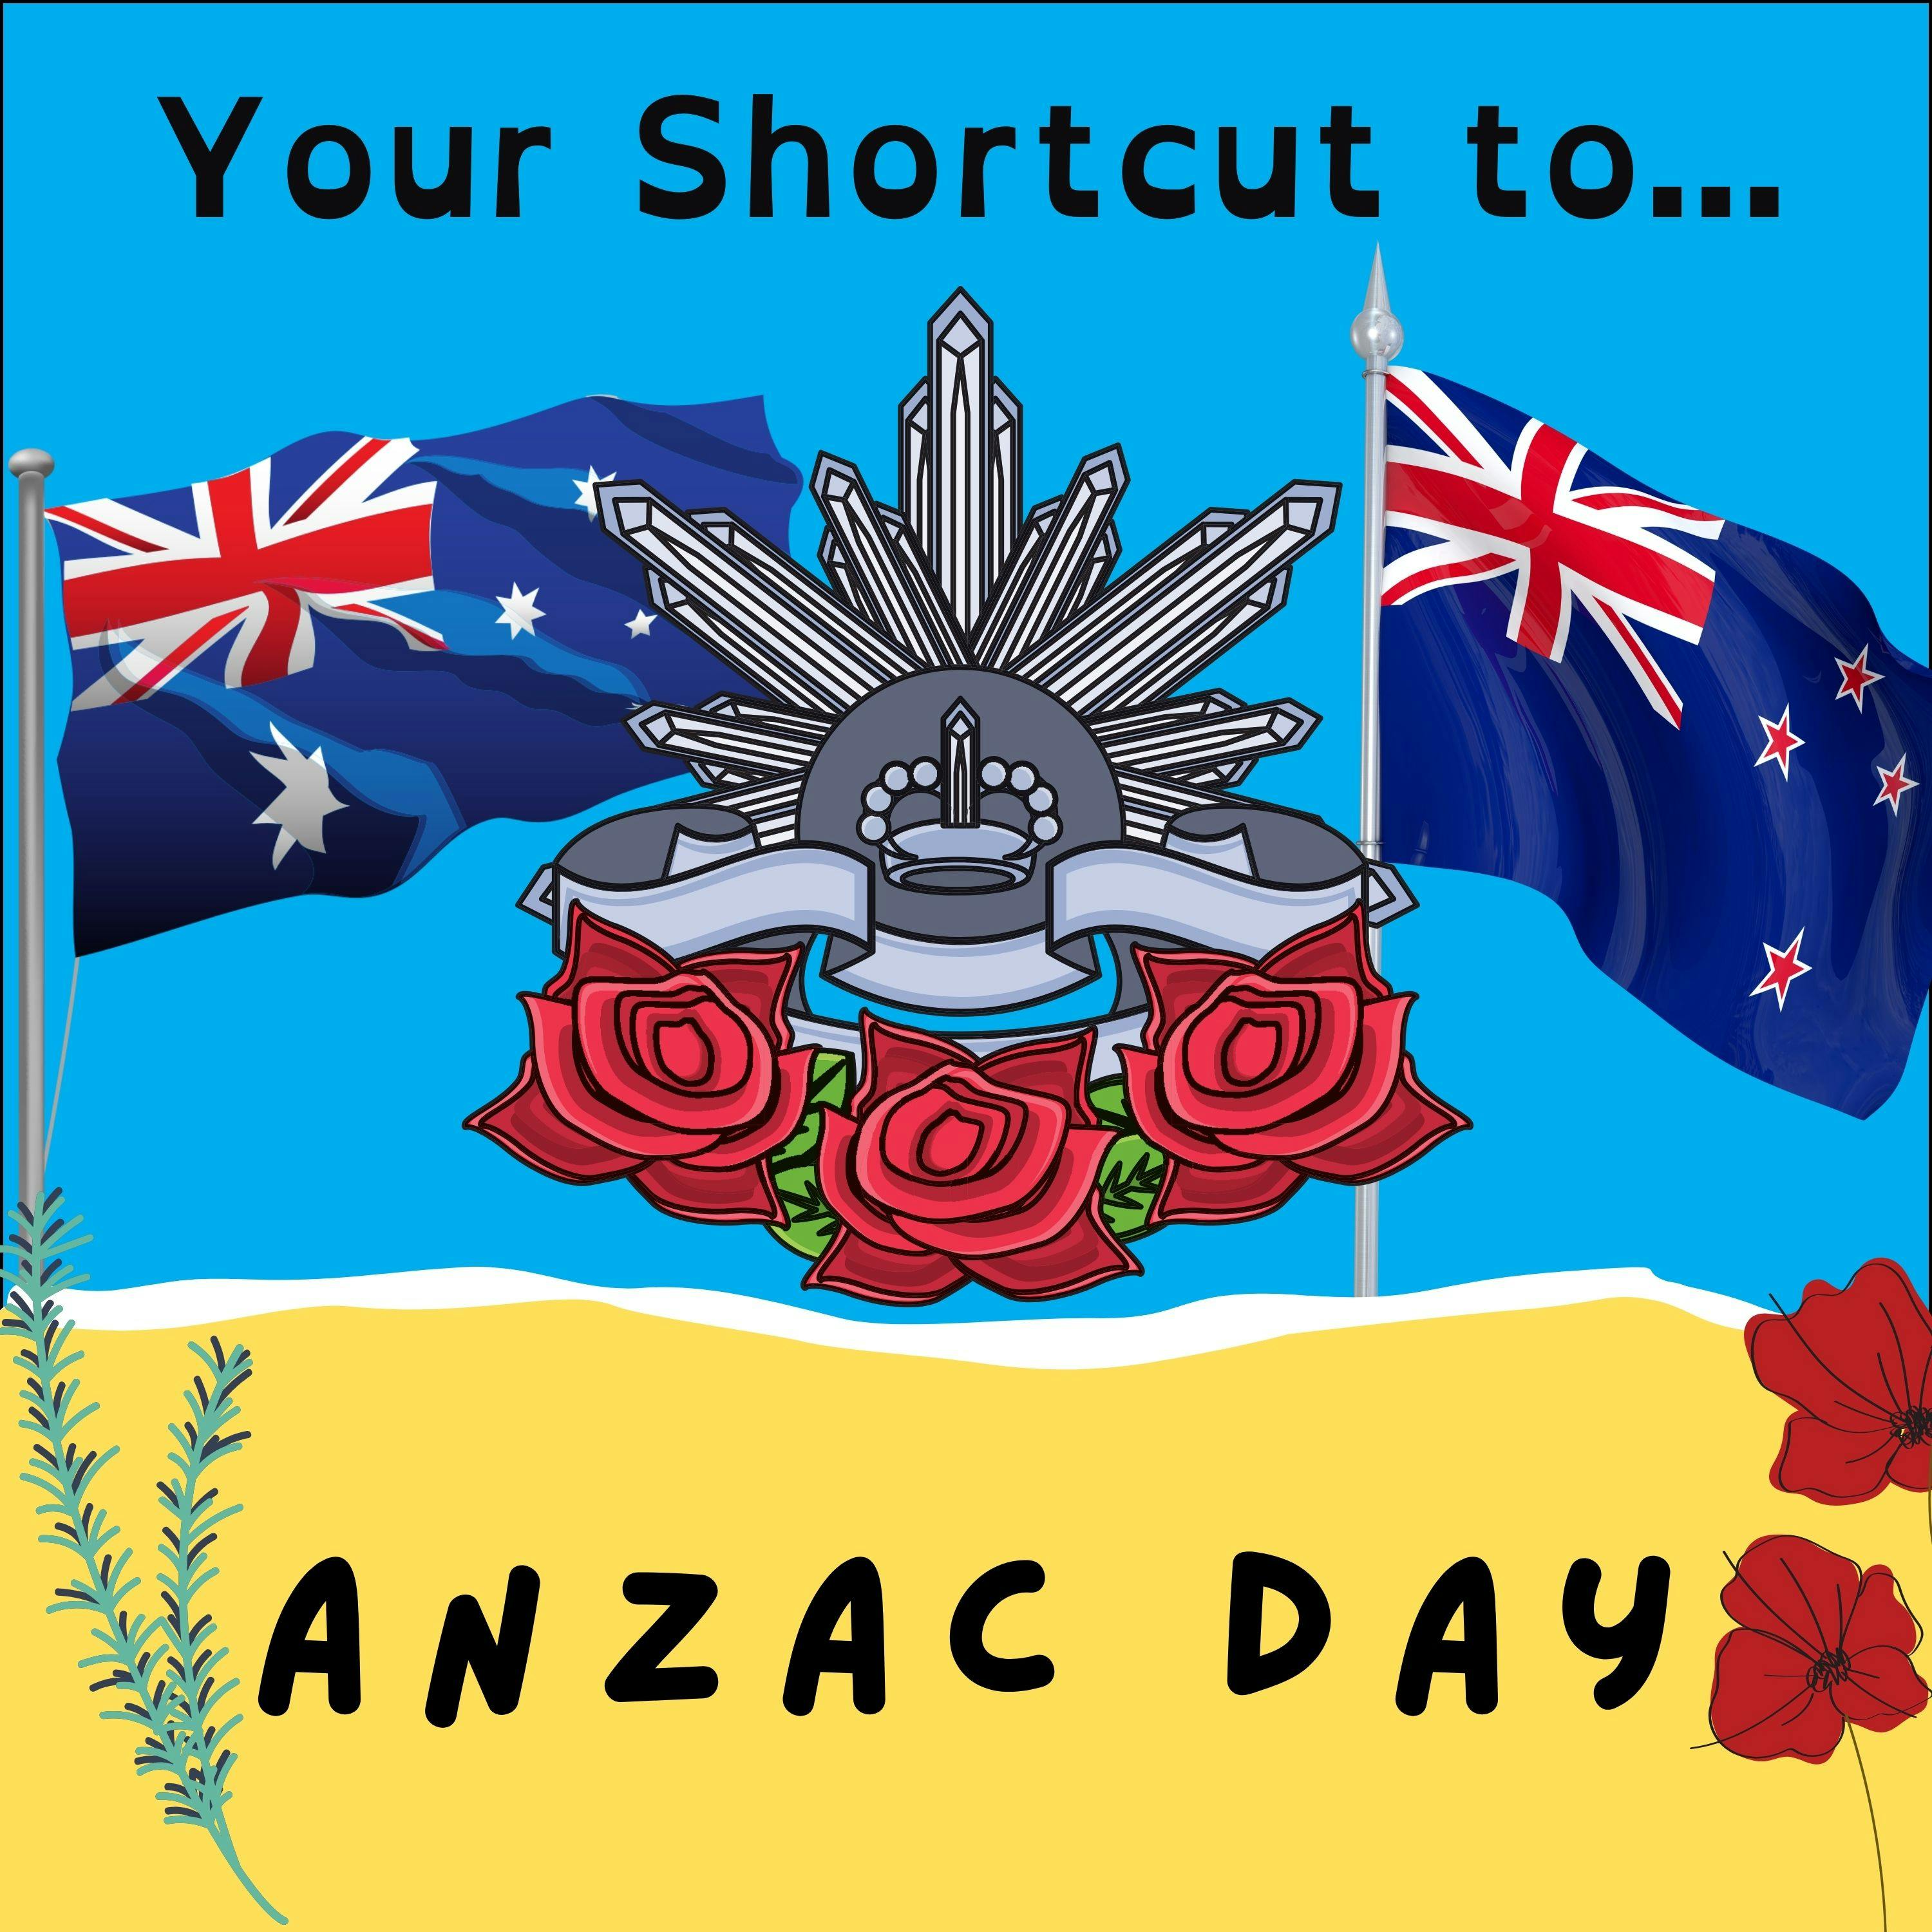 Your Shortcut to... ANZAC Day